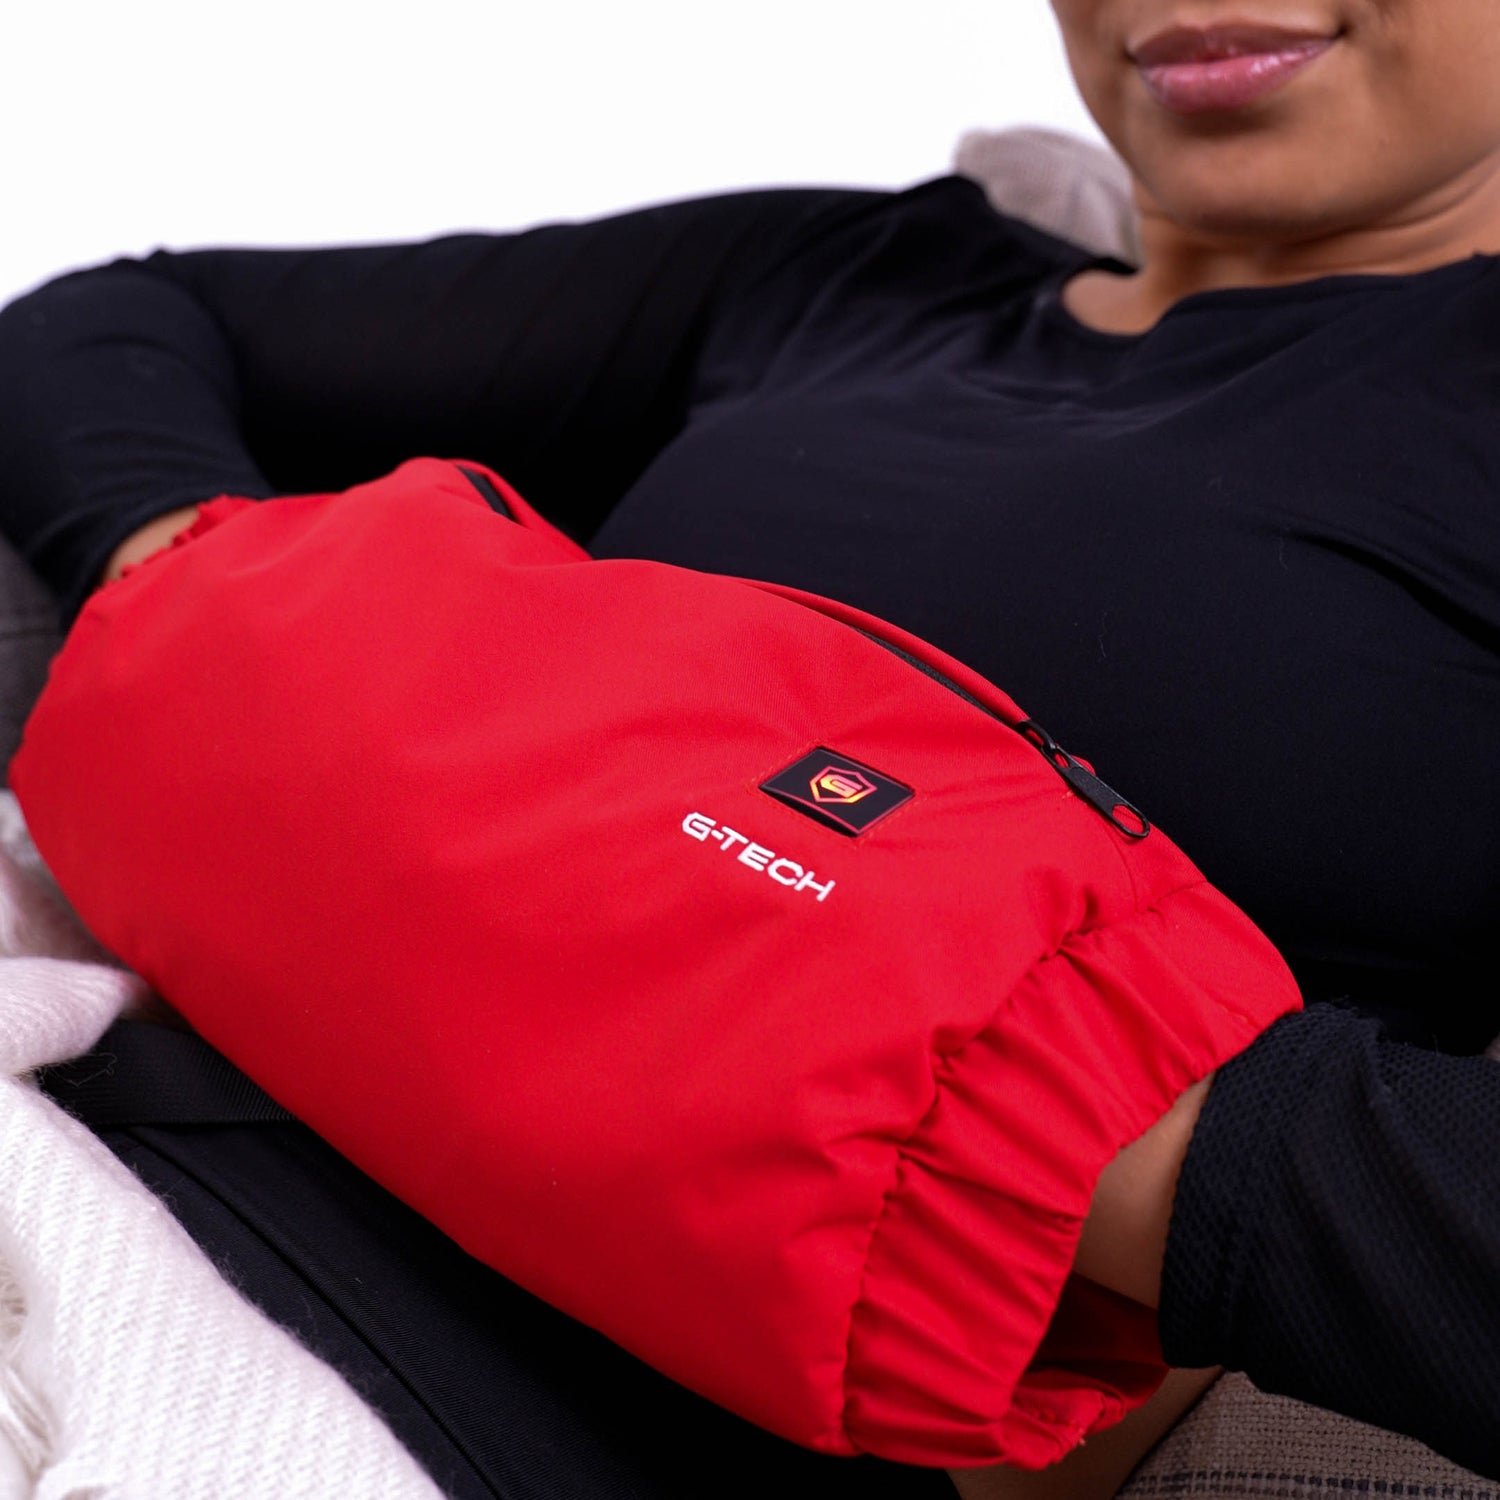 G-Tech's patented technology makes this hand warmer one of the handwarmers for anyone with hand pain. It is an essential piece of RS and arthritis apparel as it is more versatile than hand warming gloves.